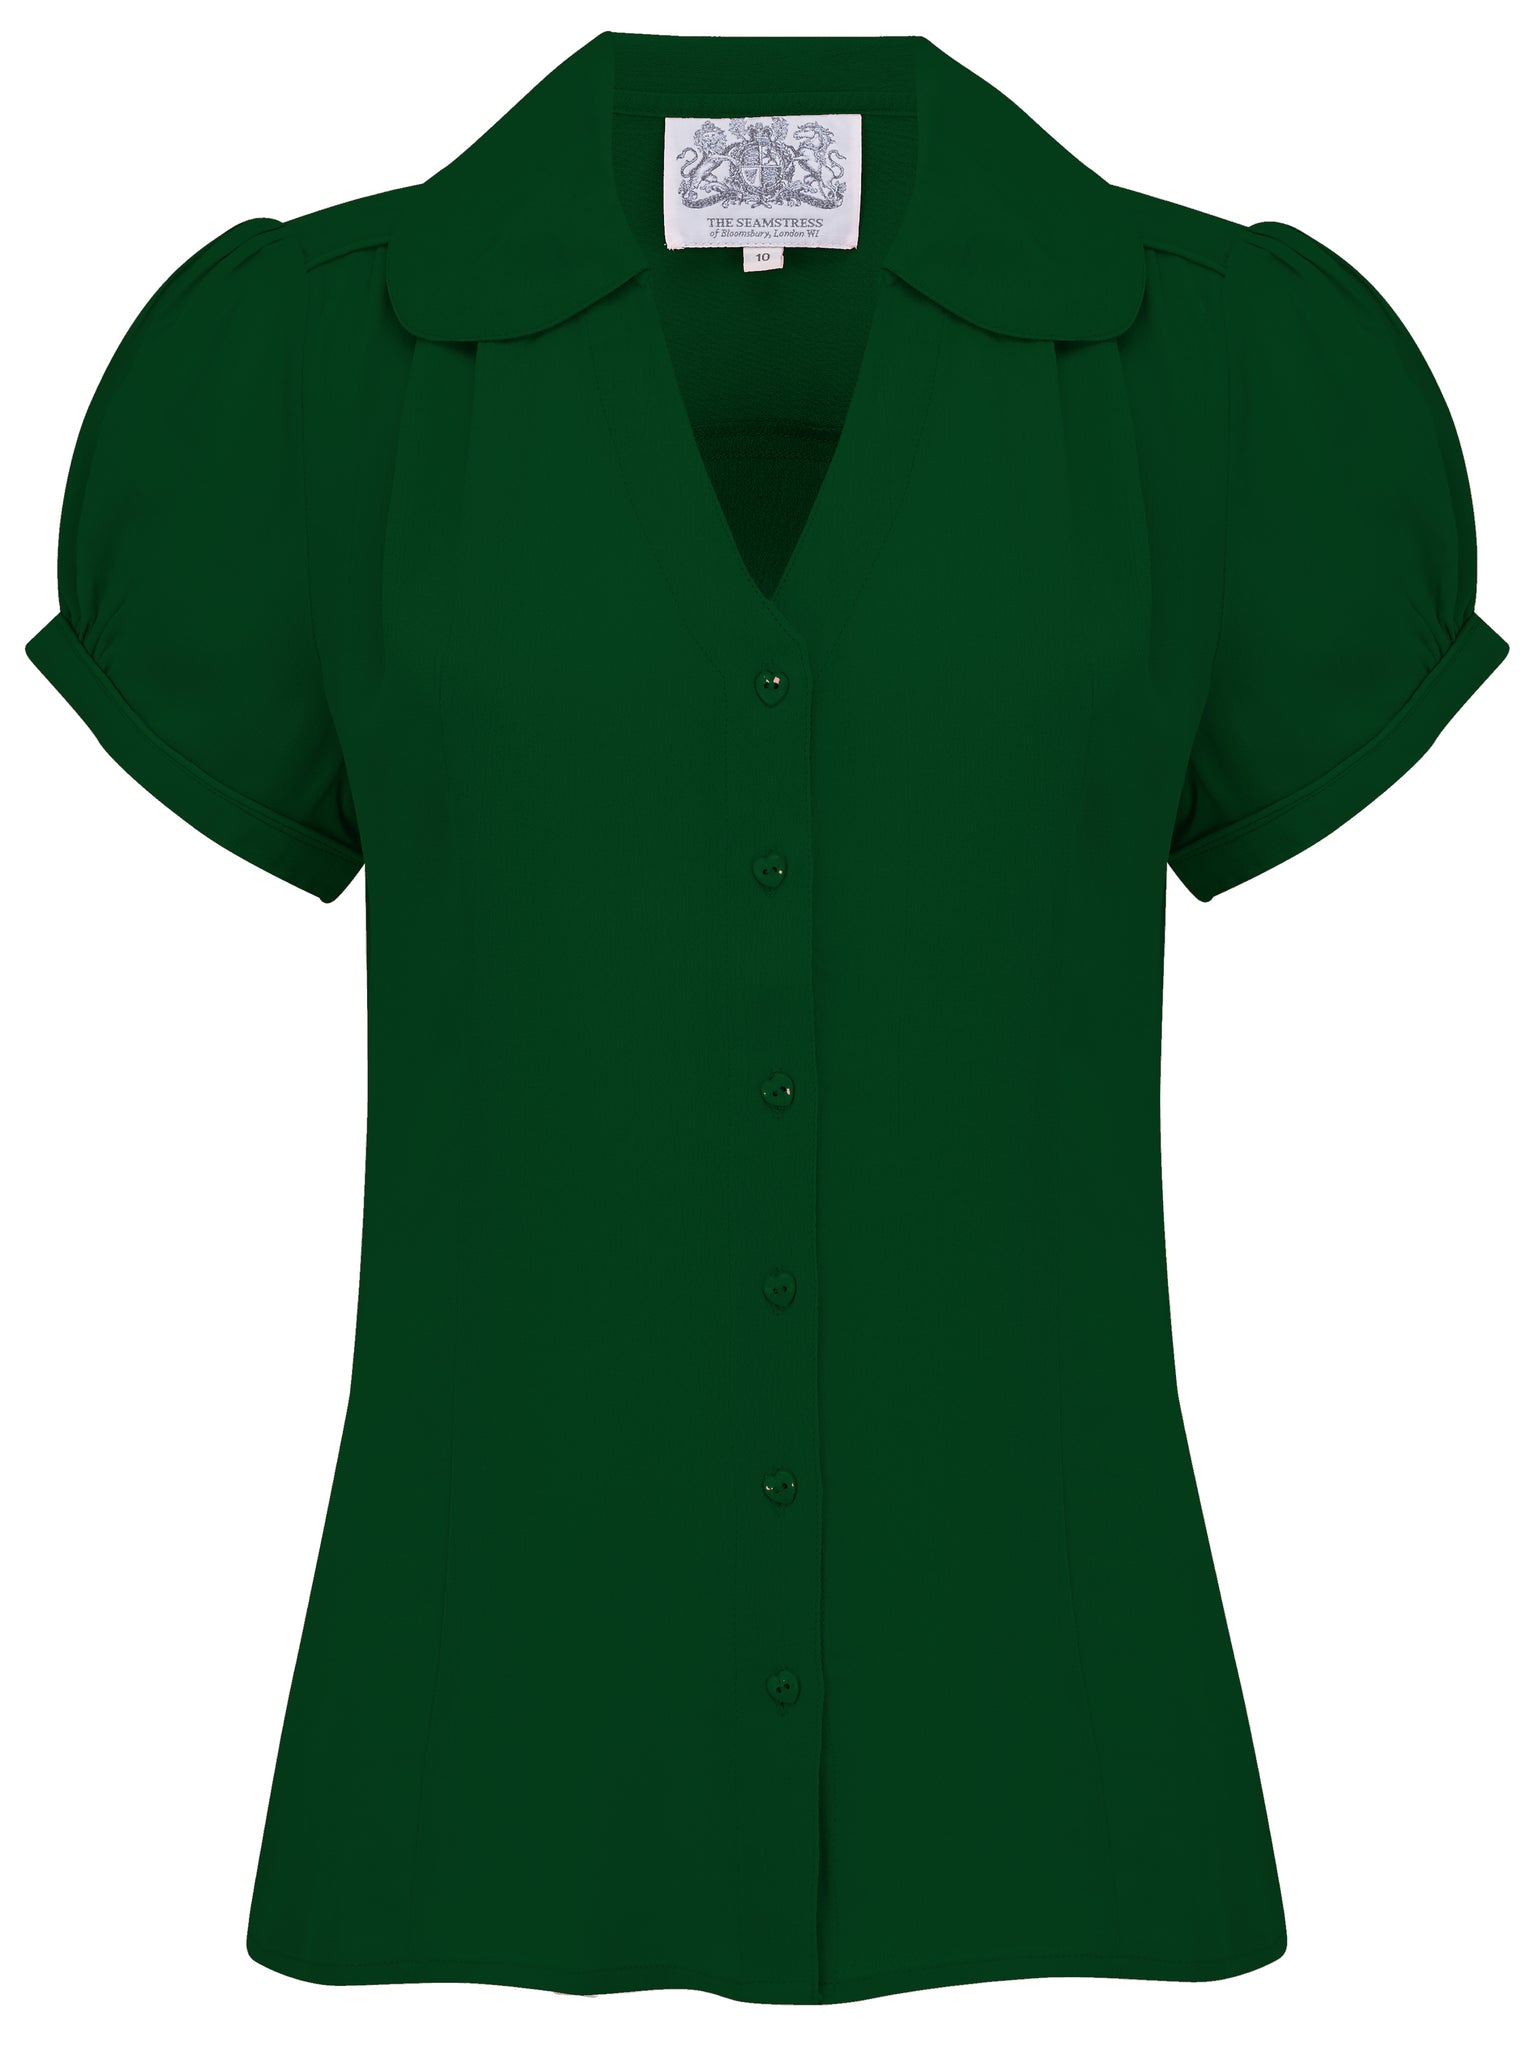 "Judy" Blouse in Green, Classic 1940s Vintage Style - True and authentic vintage style clothing, inspired by the Classic styles of CC41 , WW2 and the fun 1950s RocknRoll era, for everyday wear plus events like Goodwood Revival, Twinwood Festival and Viva Las Vegas Rockabilly Weekend Rock n Romance The Seamstress Of Bloomsbury